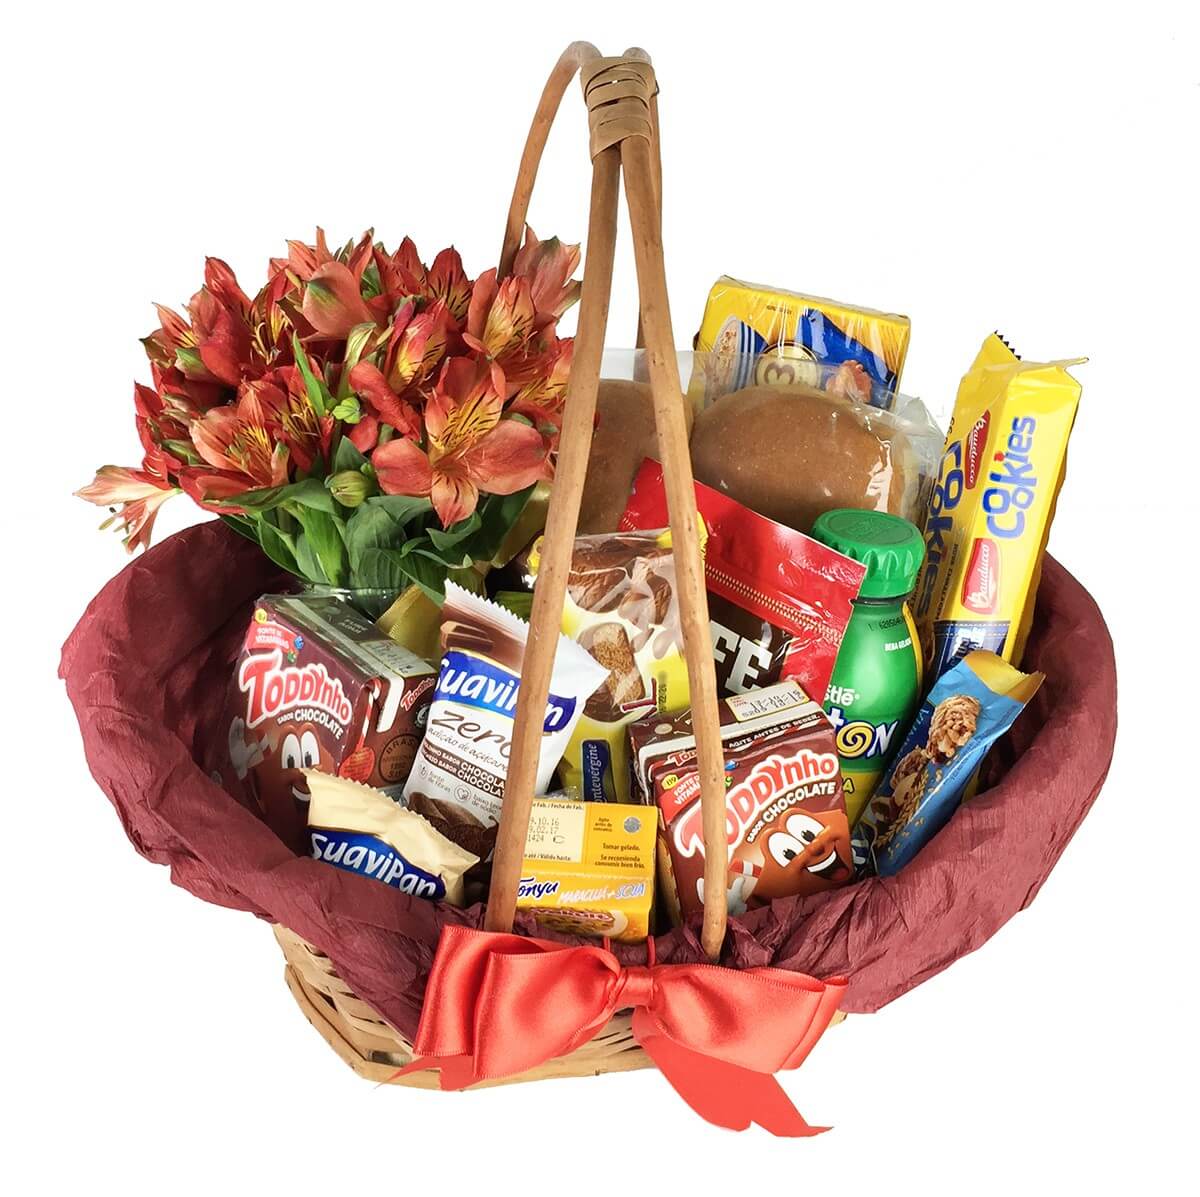 Send Gifts to Brazil, Hampers to Brazil